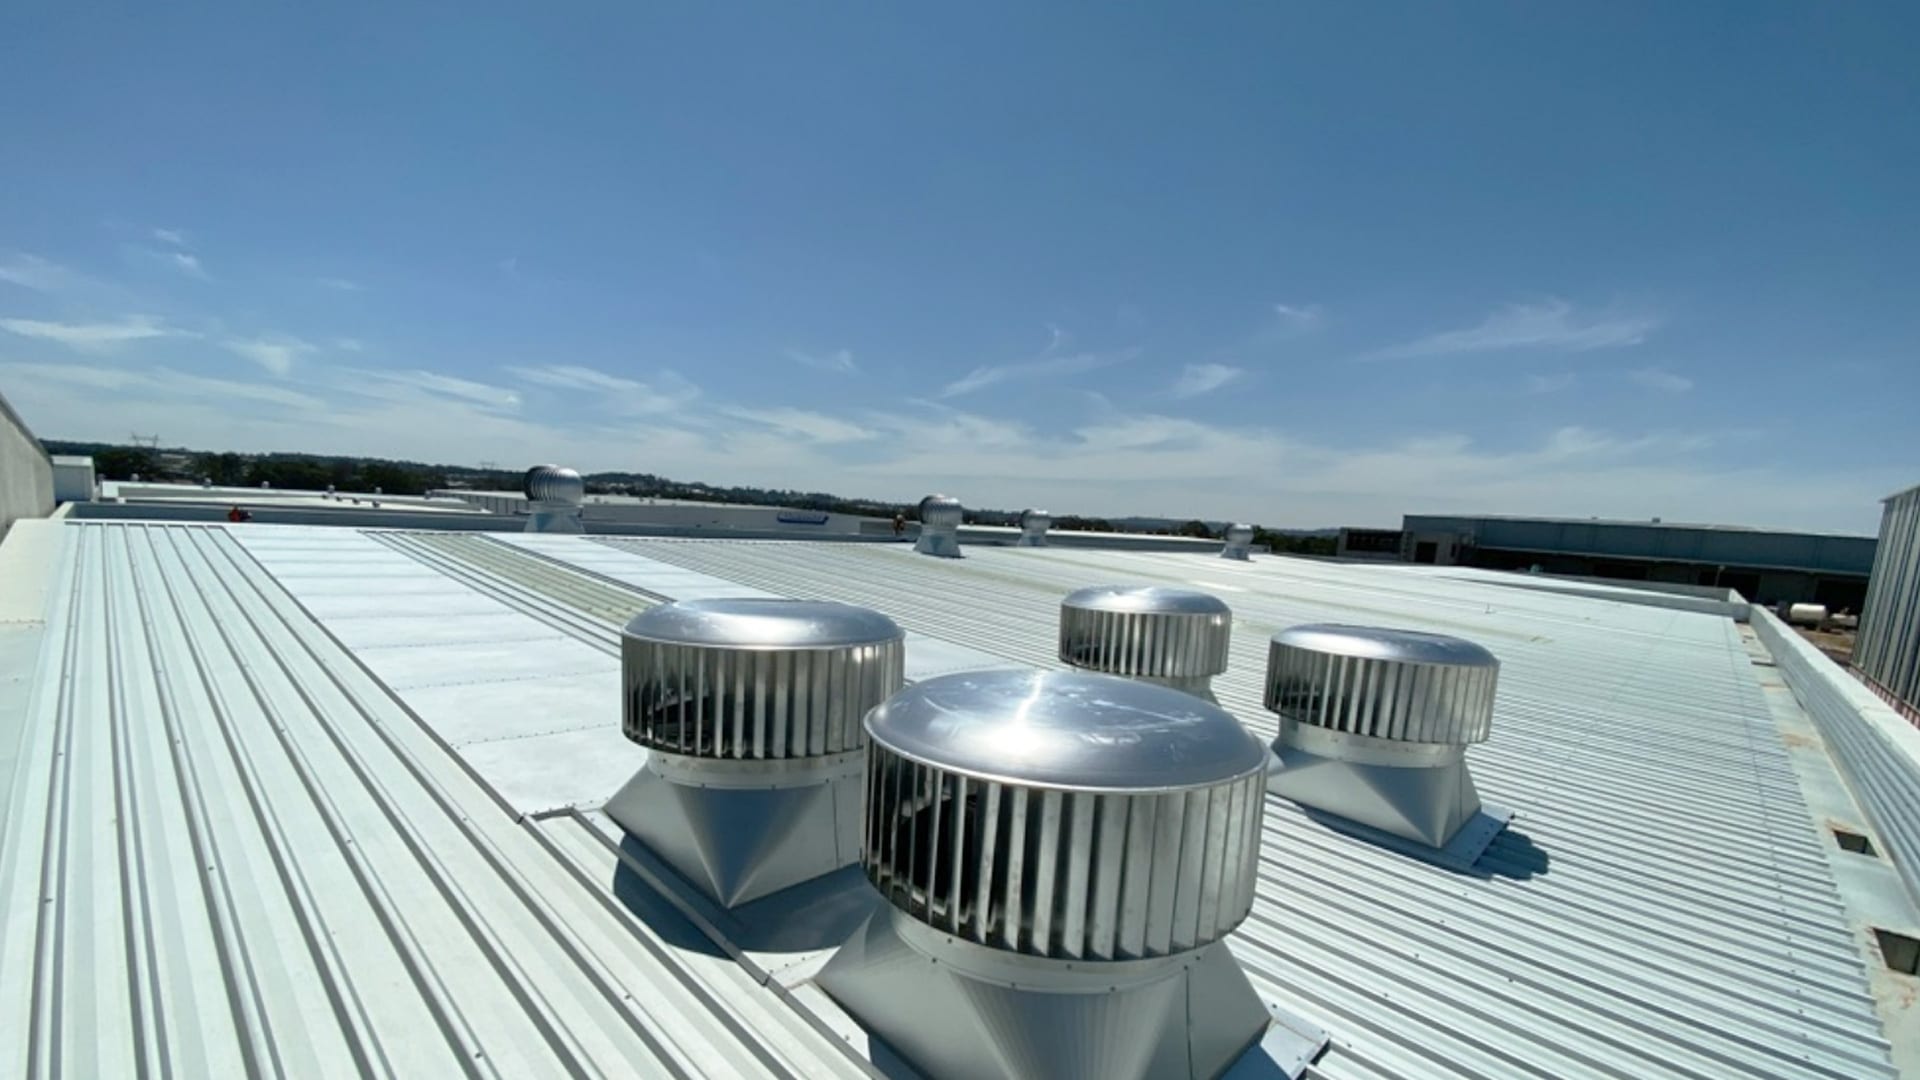 Large Commercial Roof Vents Installed for Chillex Sydney